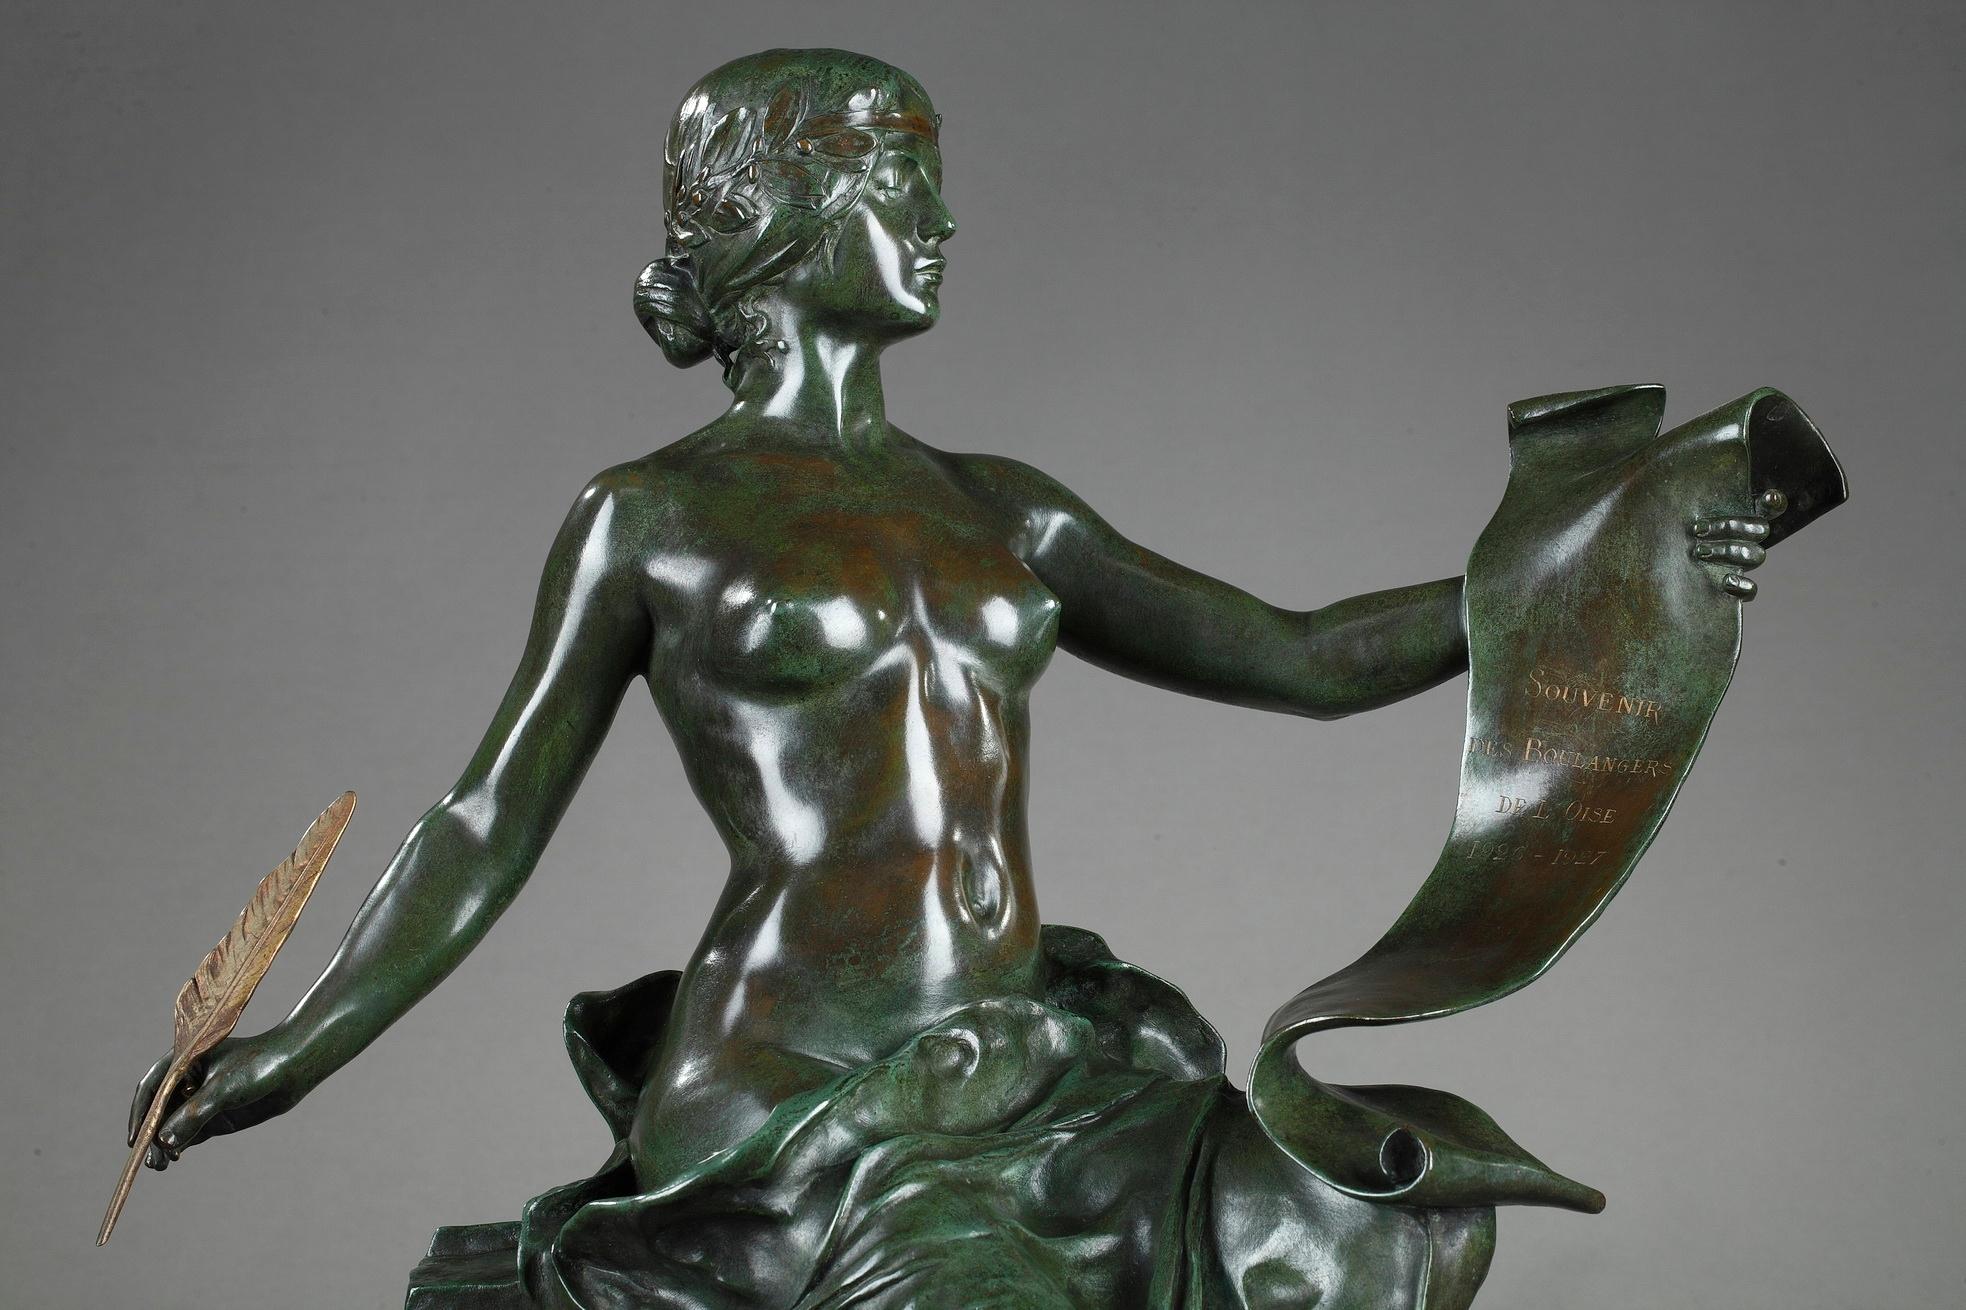 French bronze of a nude woman sitting, holding a scroll and a gilt quill. She wears a laurel headpiece, symbol of triumph and victory. Signed Georges Bareau for Georges-Marie-Valentin Bareau (French, 1866-1931) and stamped with the foundry name F.